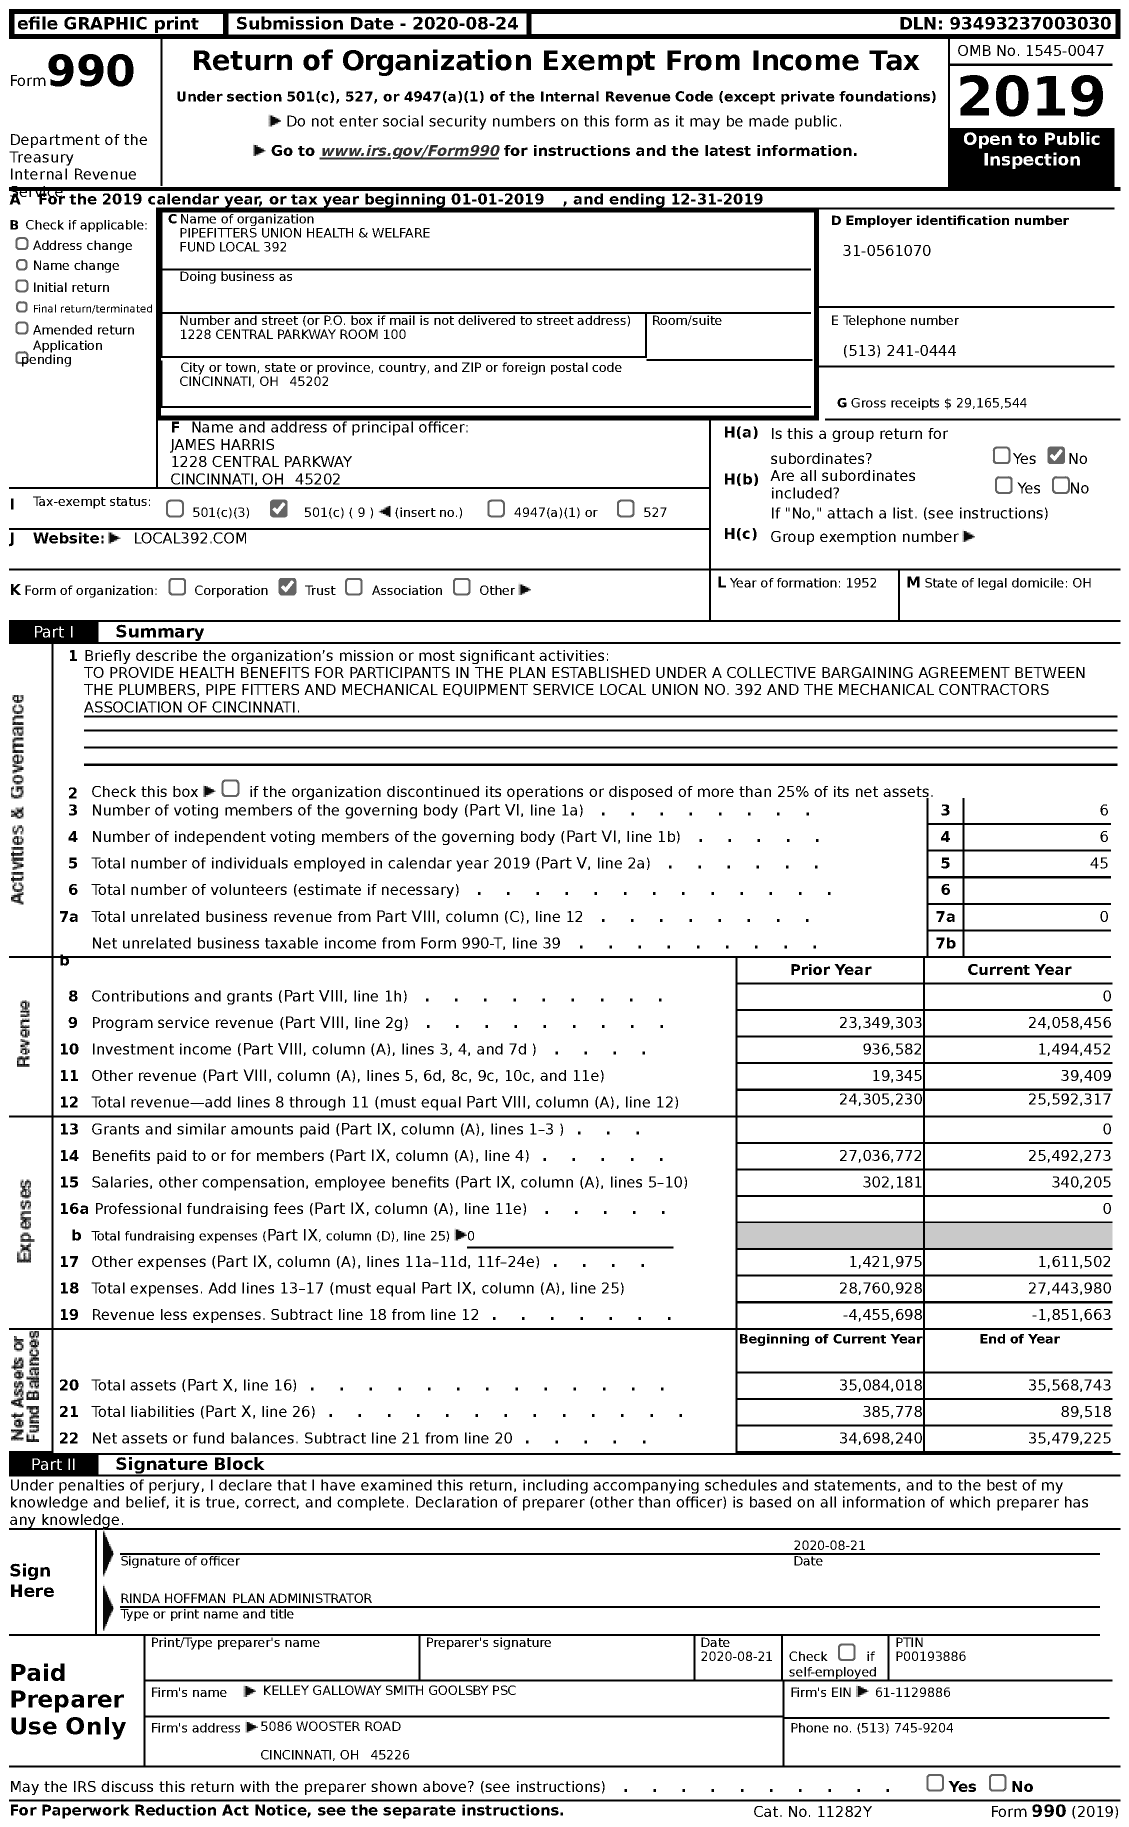 Image of first page of 2019 Form 990 for Pipefitters Union Health and Welfare Fund Local 392